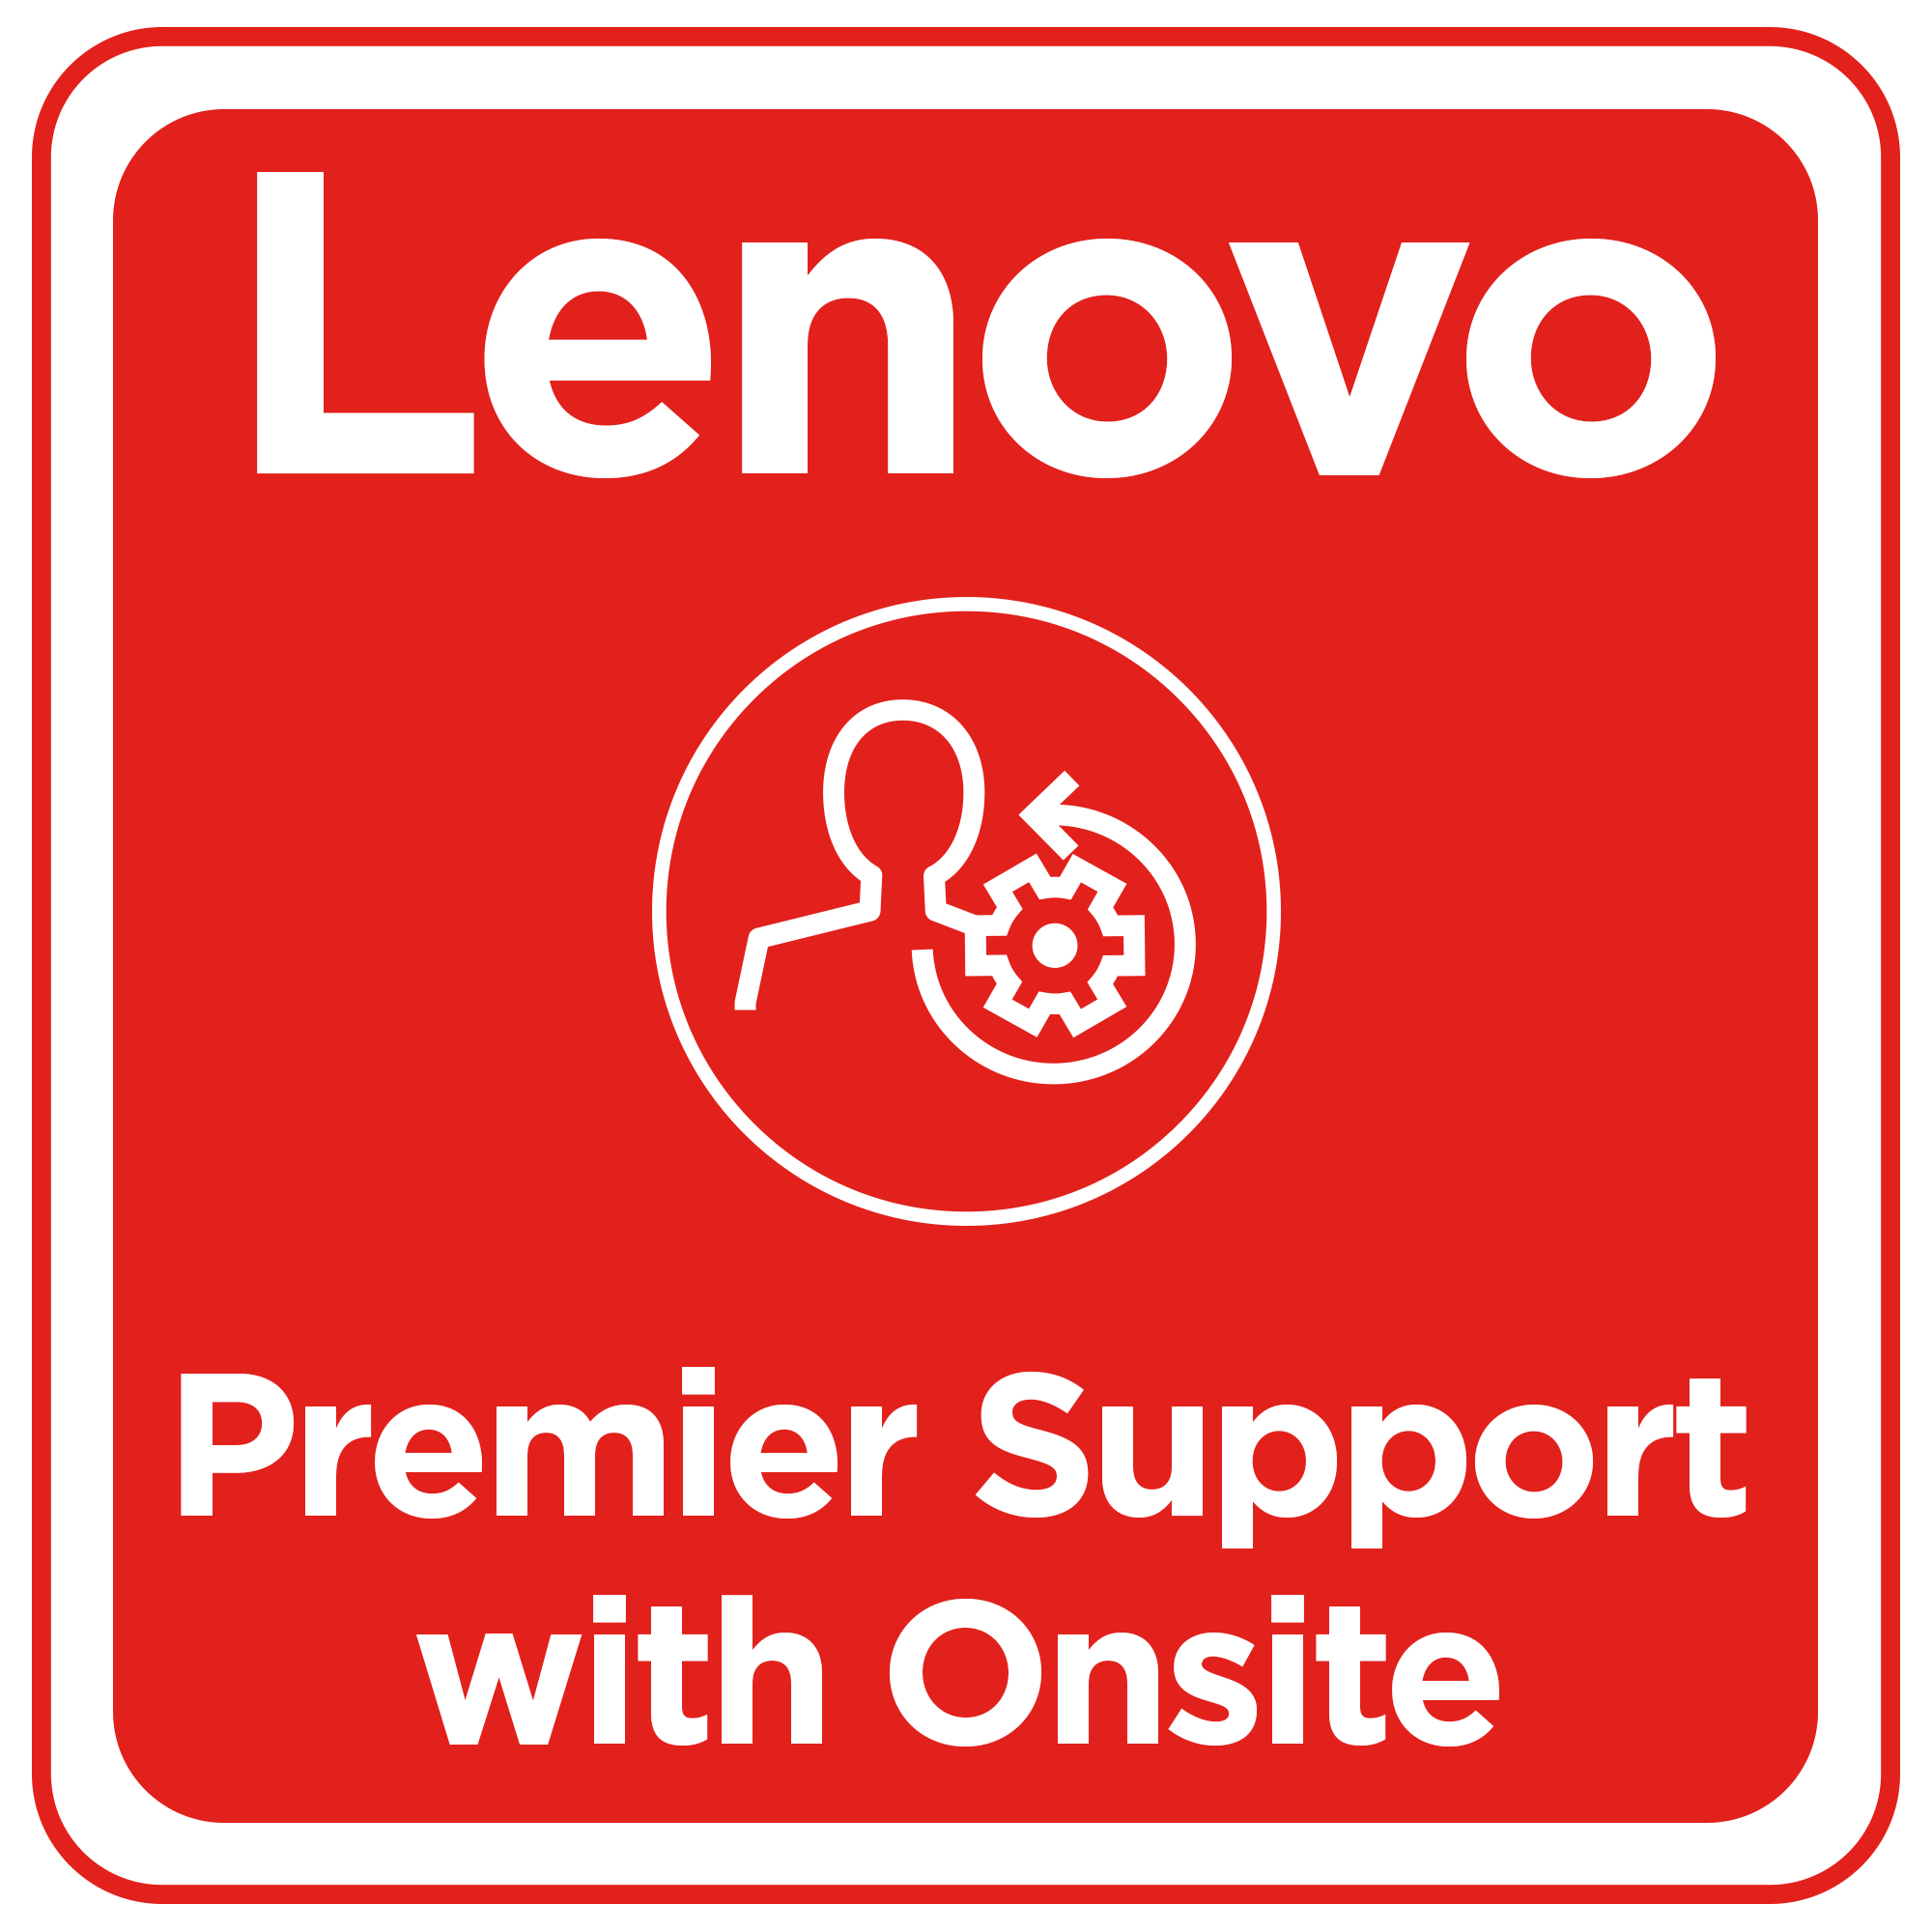 Lenovo 5 Year Premier Support With Onsite - 5WS0T36181